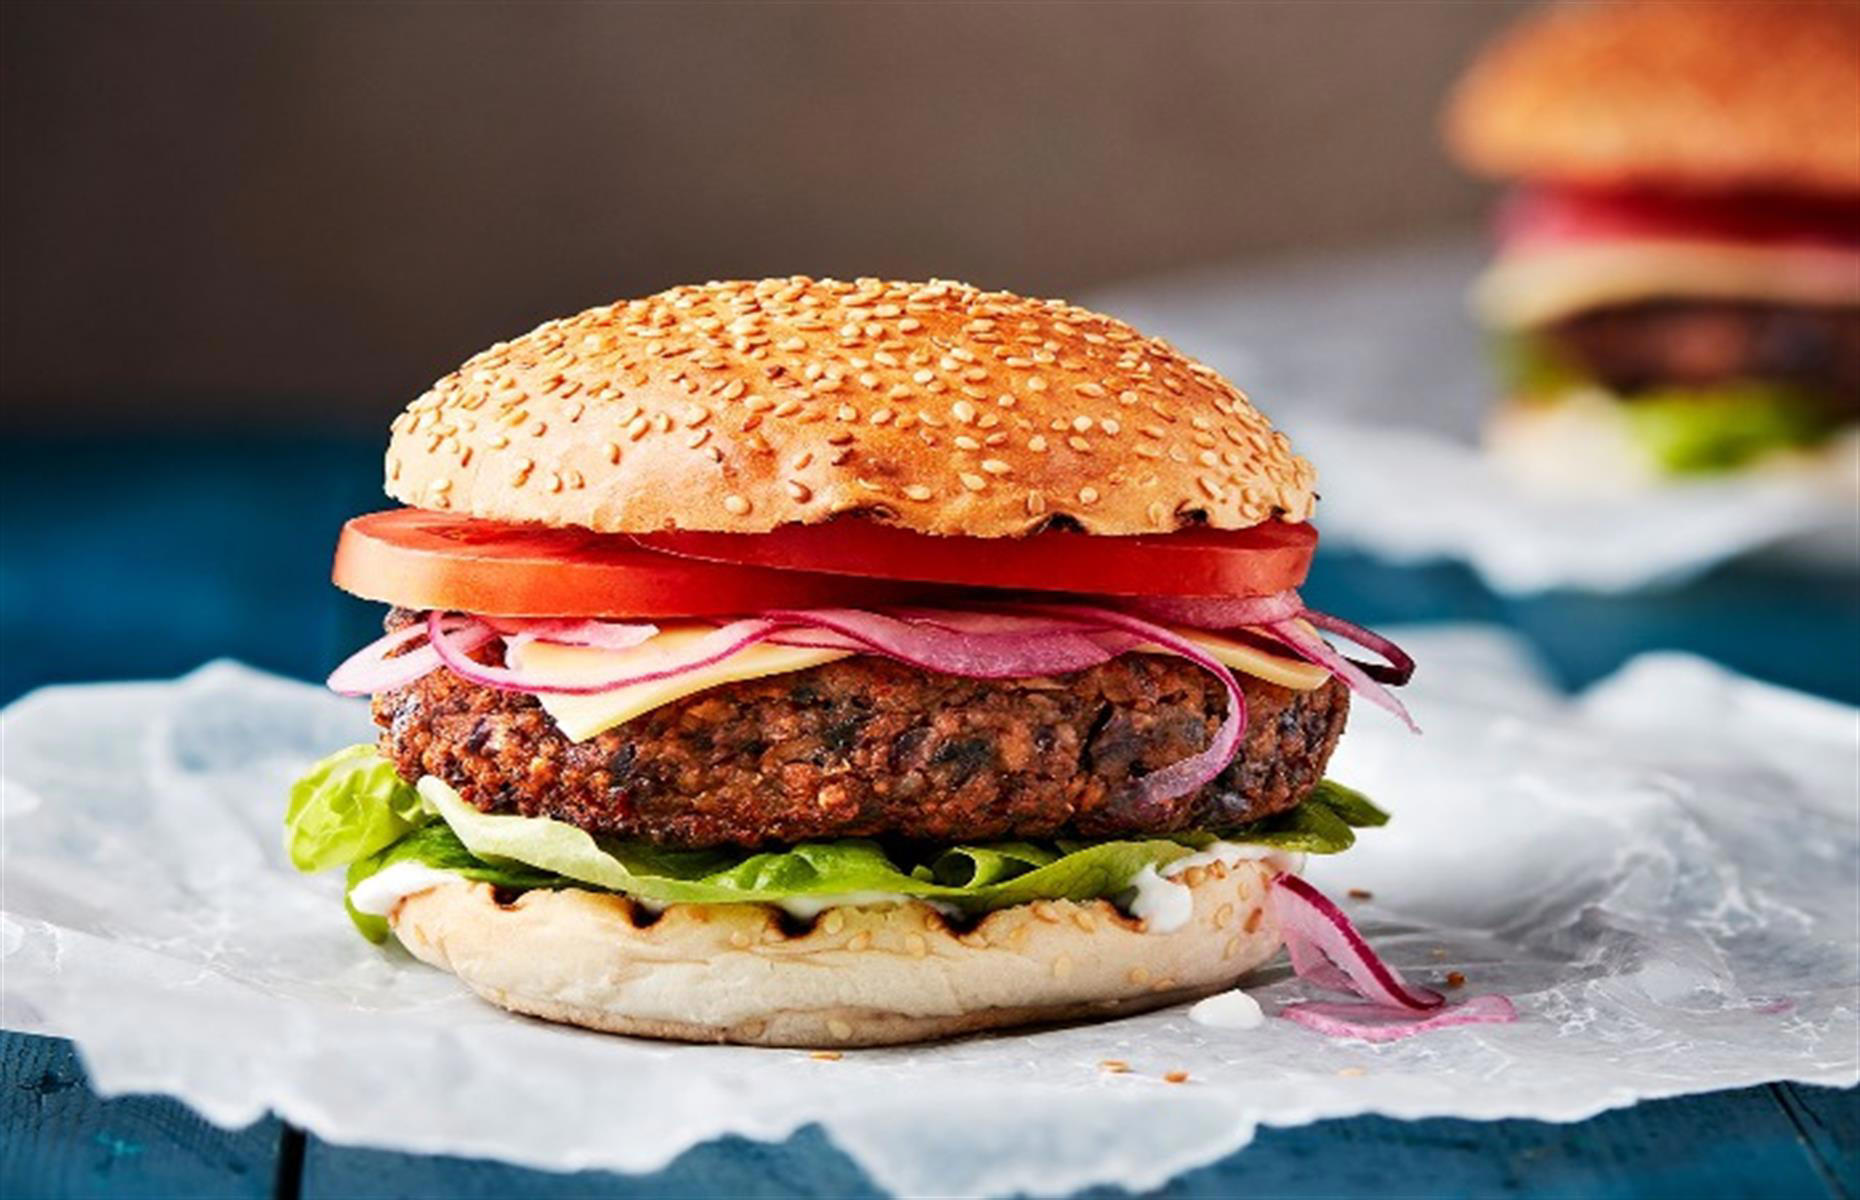 30 delicious fast food recipes EVERYONE will love